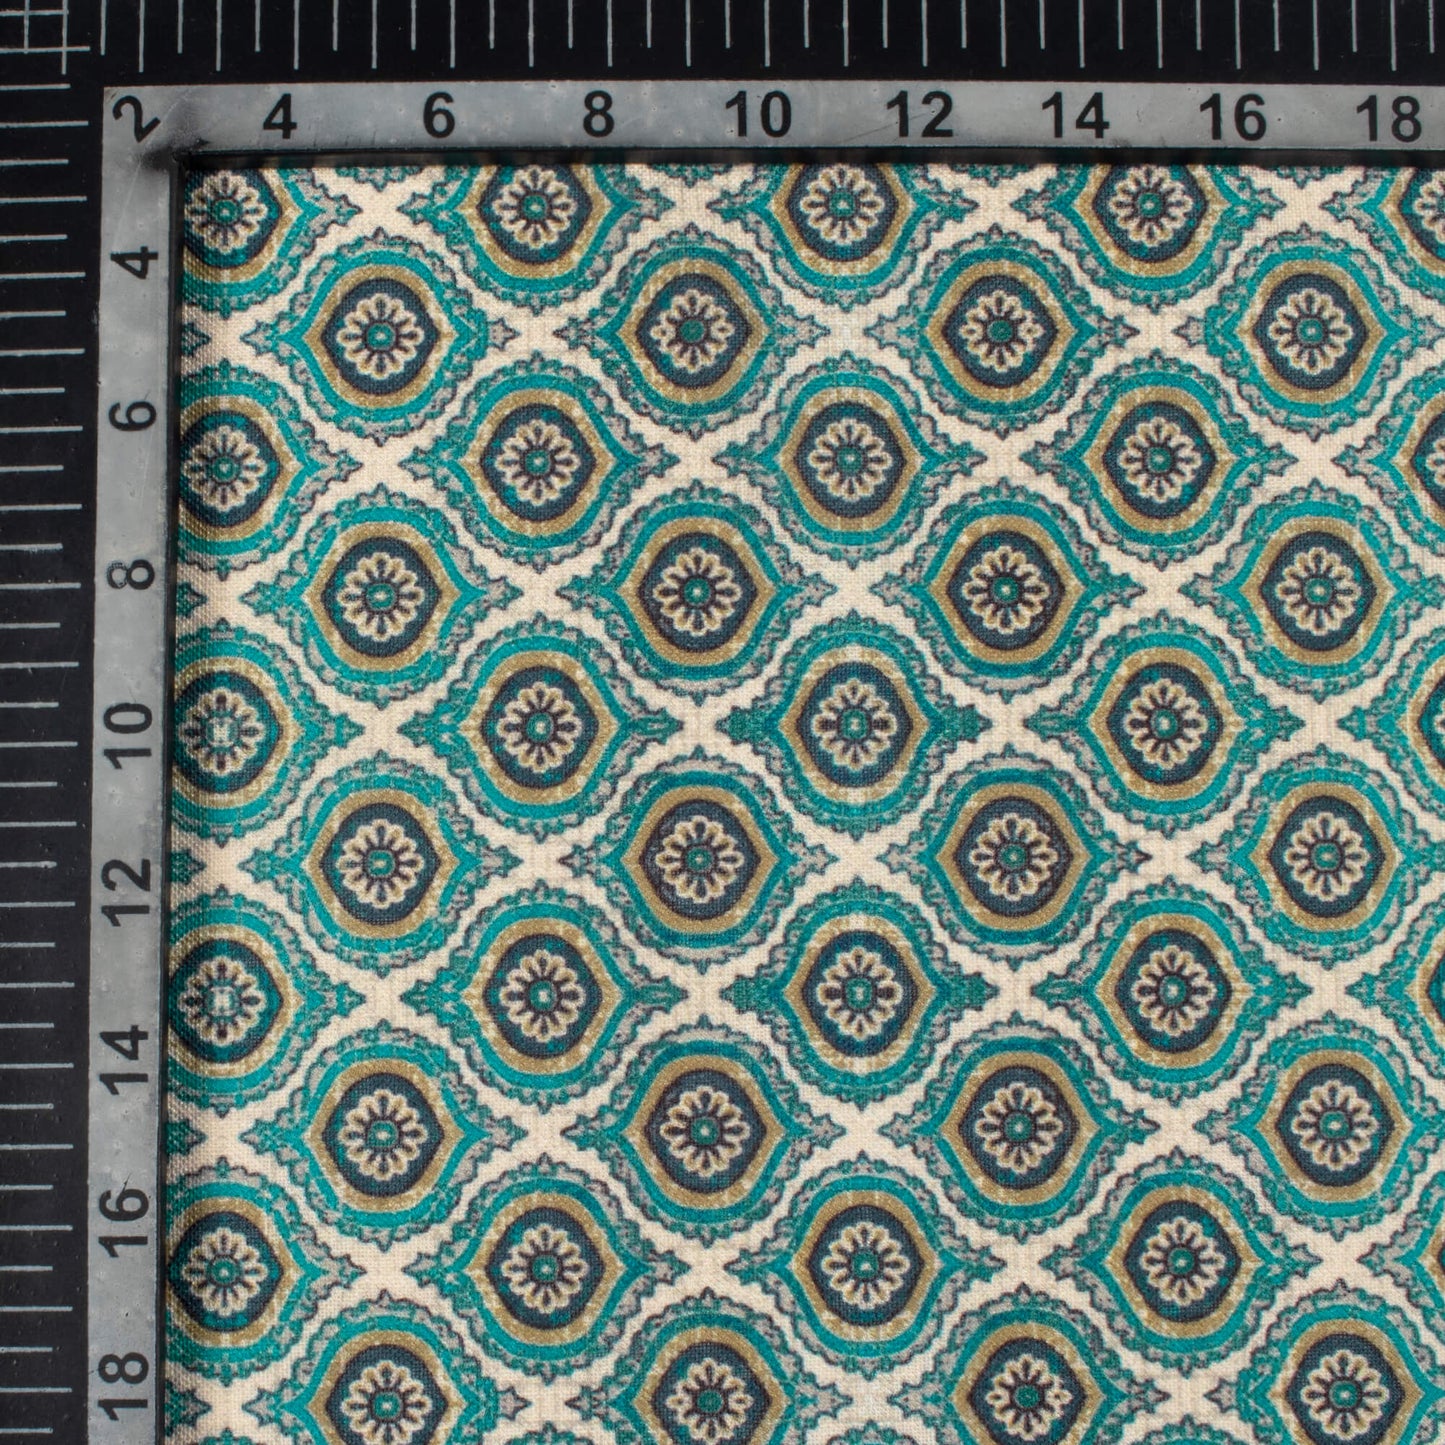 Teal Green And Off White Trellis Pattern Digital Print Linen Textured Fabric (Width 56 Inches)